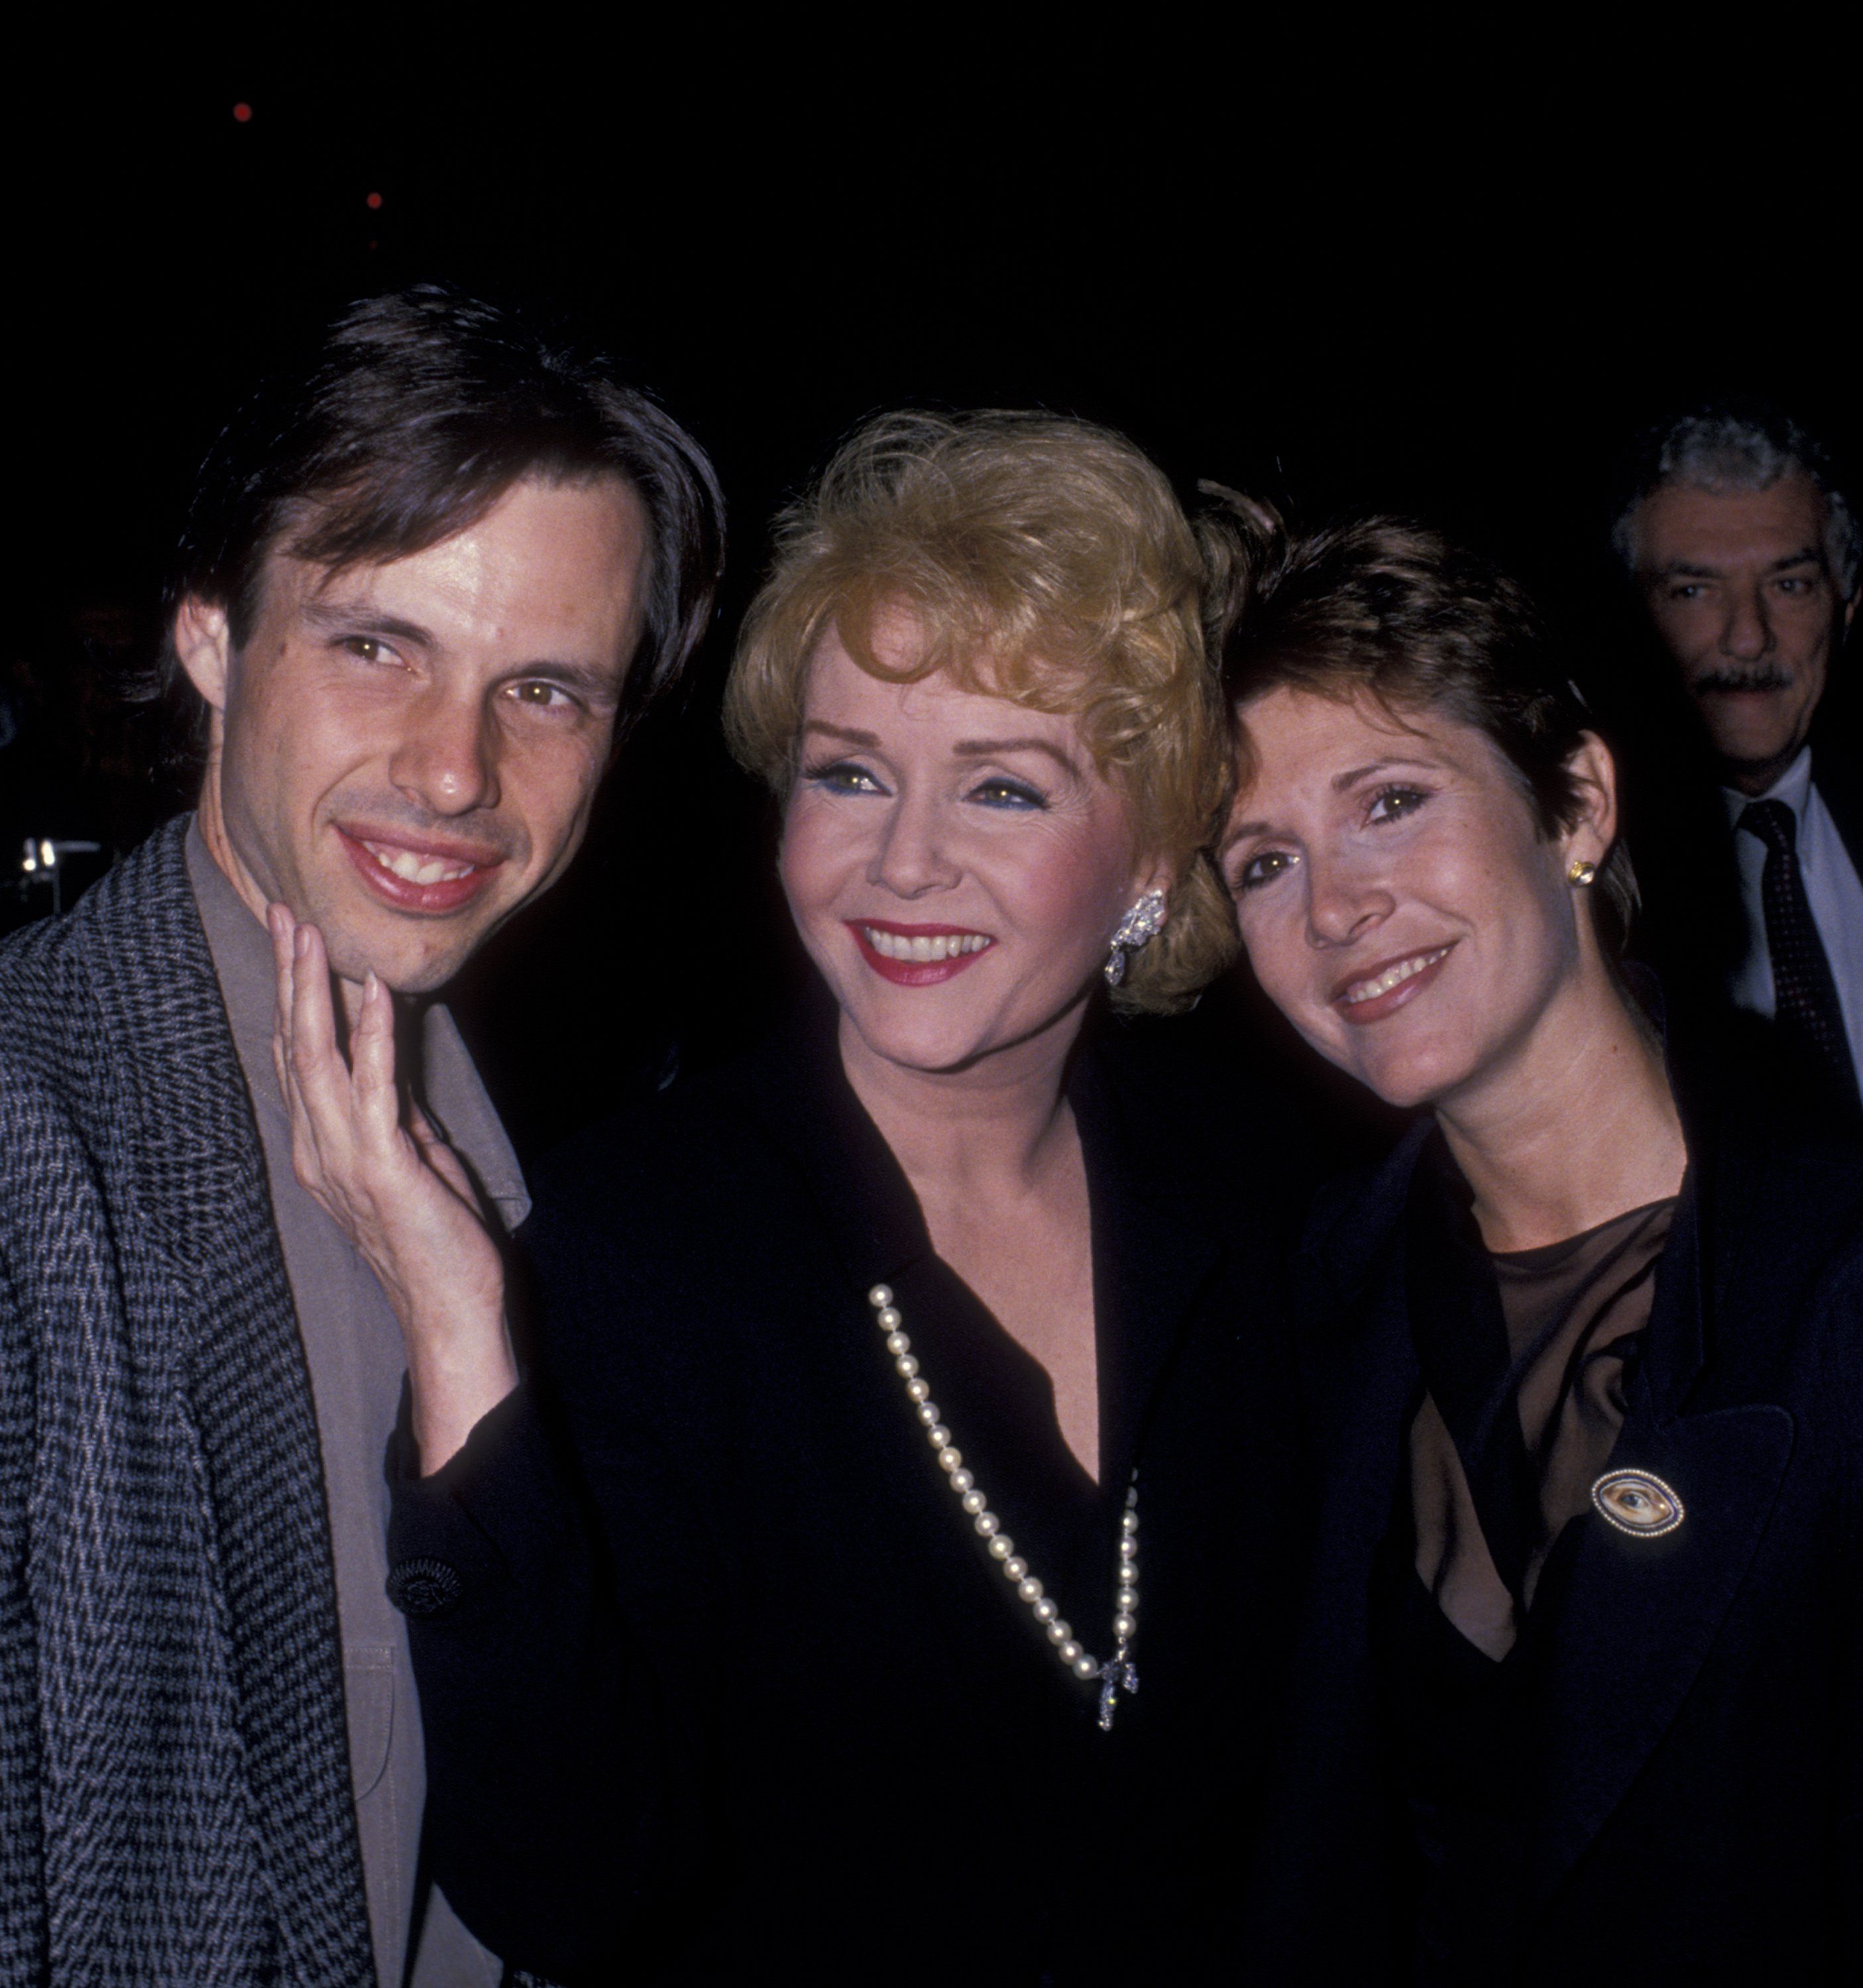 Todd Fisher, Debbie Reynolds and Carrie Fisher attend "The Unsinkable Molly Brown" Opening on September 19, 1989 at the Pantages Theater in Hollywood, California. | Source: Getty Images